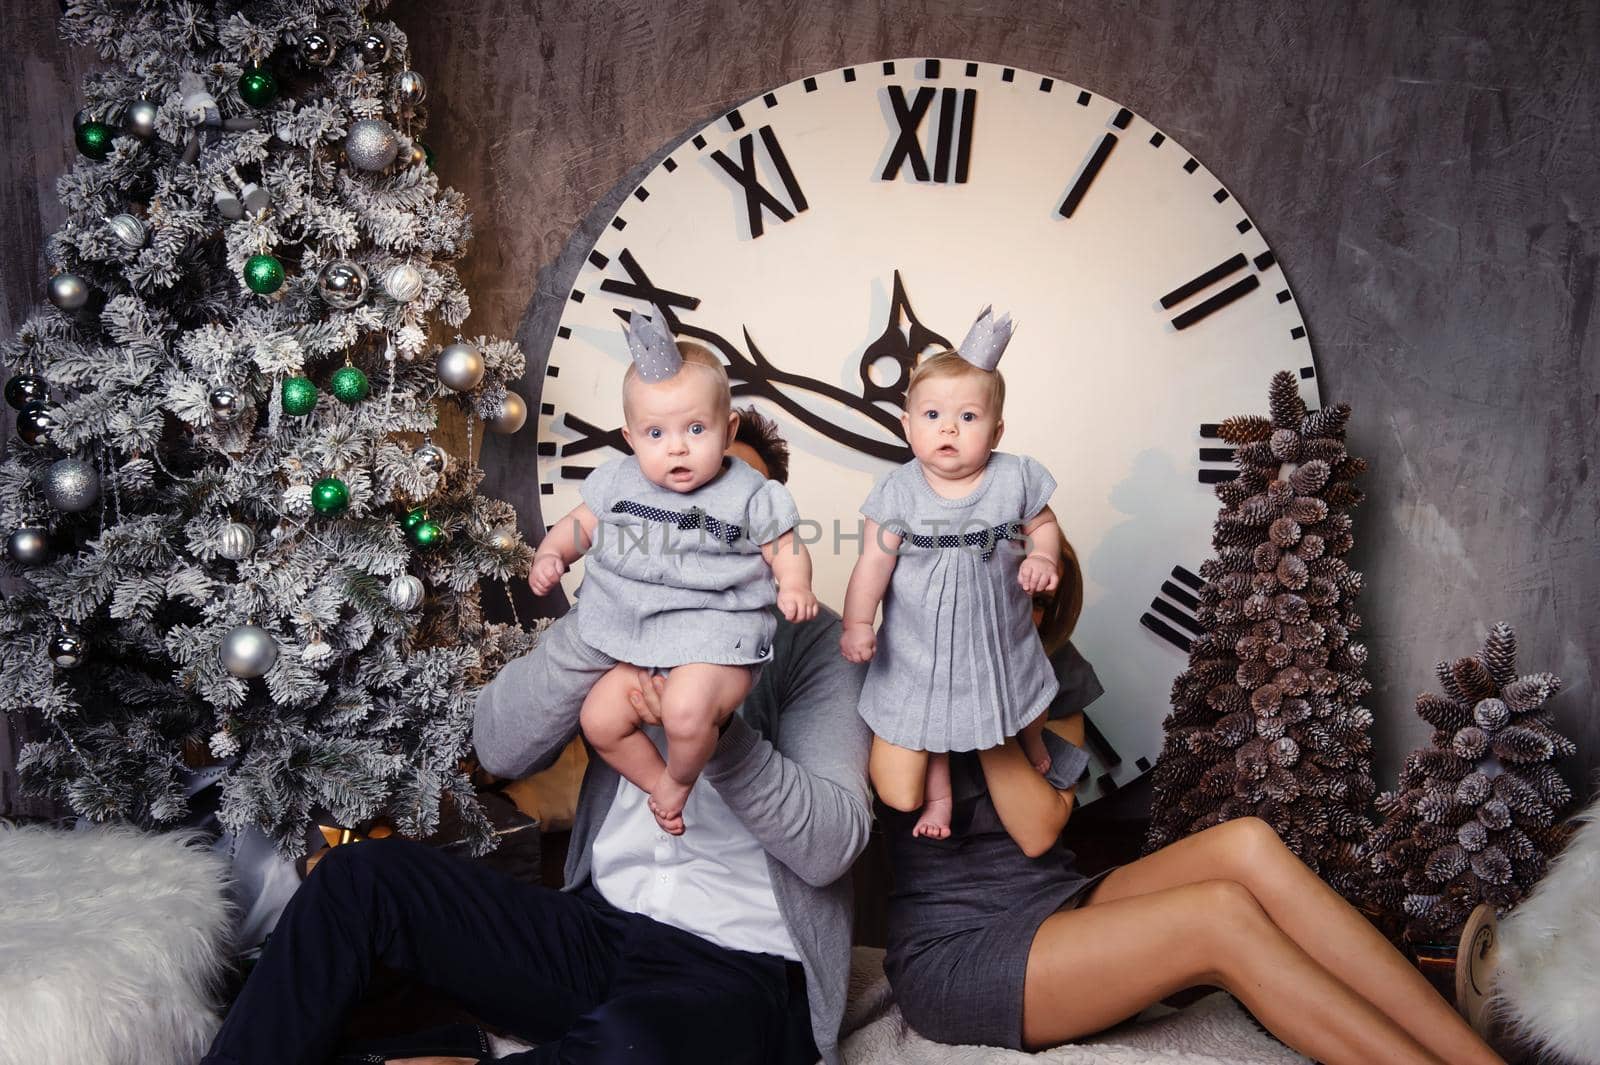 A happy big family with twin children in the New Year's interior of the house against the background of a large clock by Lobachad